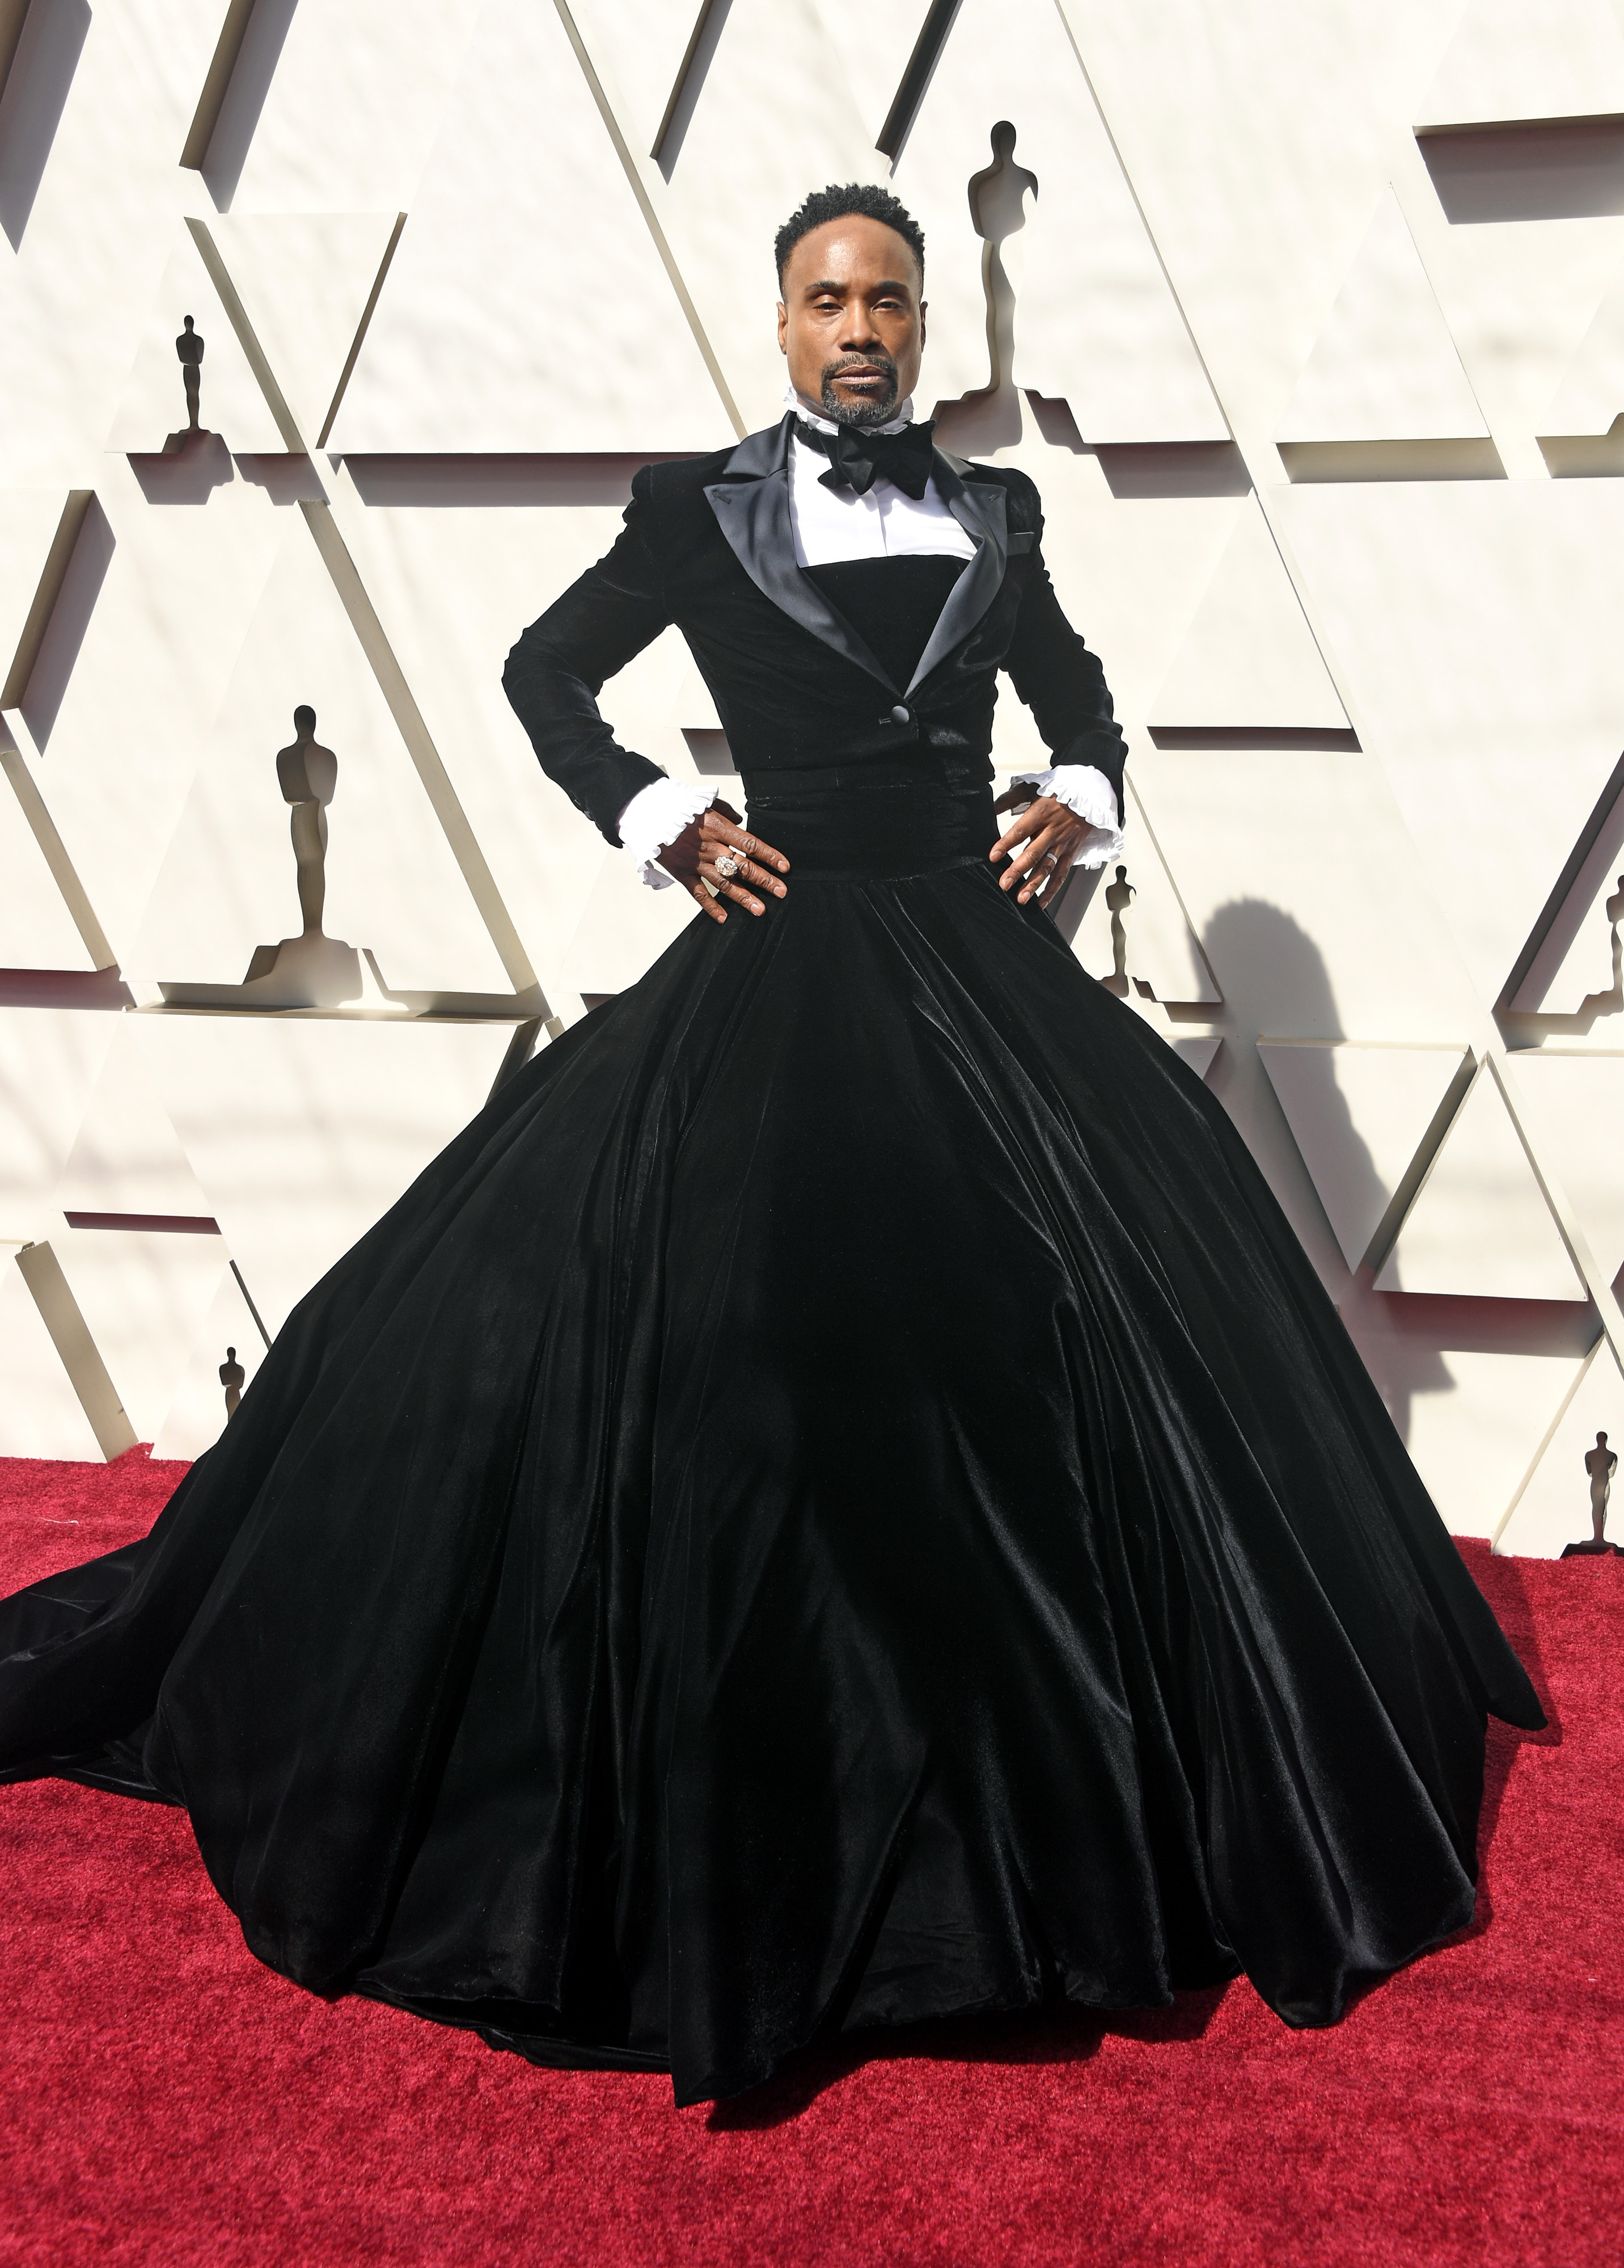 Billy Porter attends the 91st Annual Academy Awards